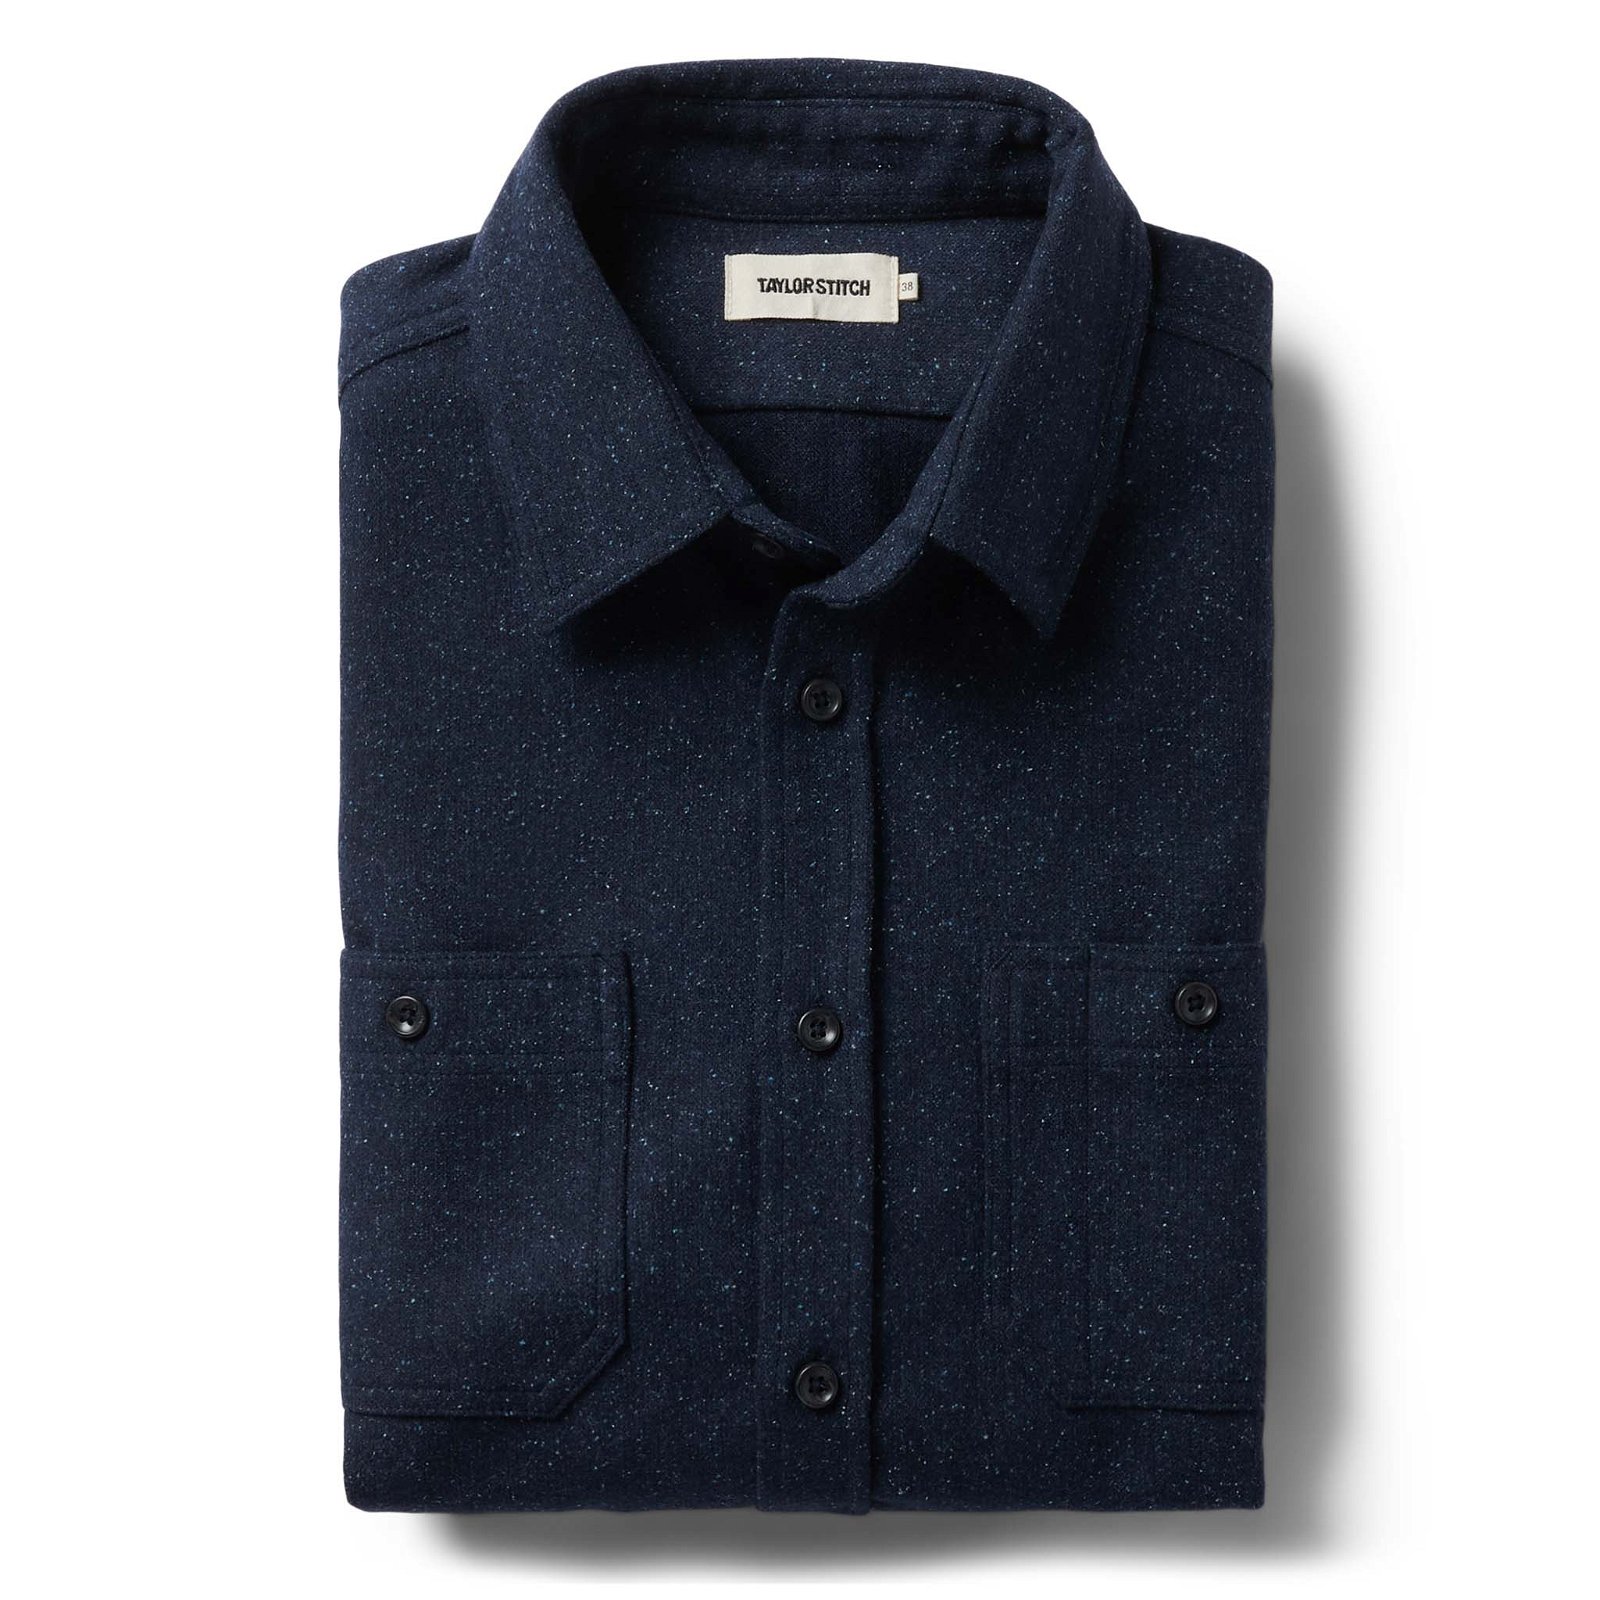 Image of The Utility Shirt in Navy Donegal Wool